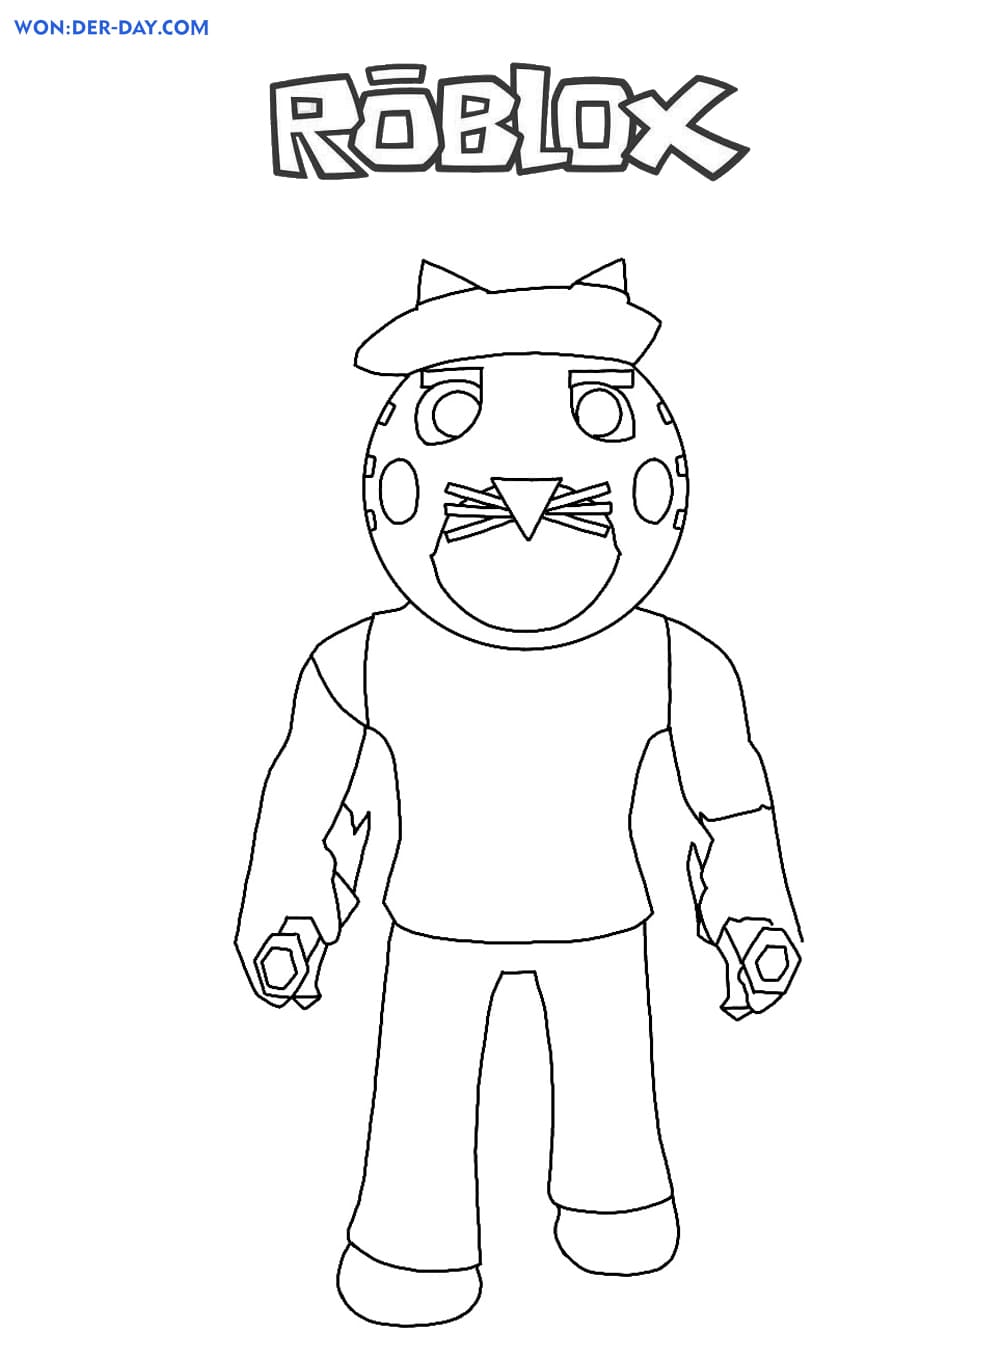 piggy roblox coloring pages wonder day coloring pages